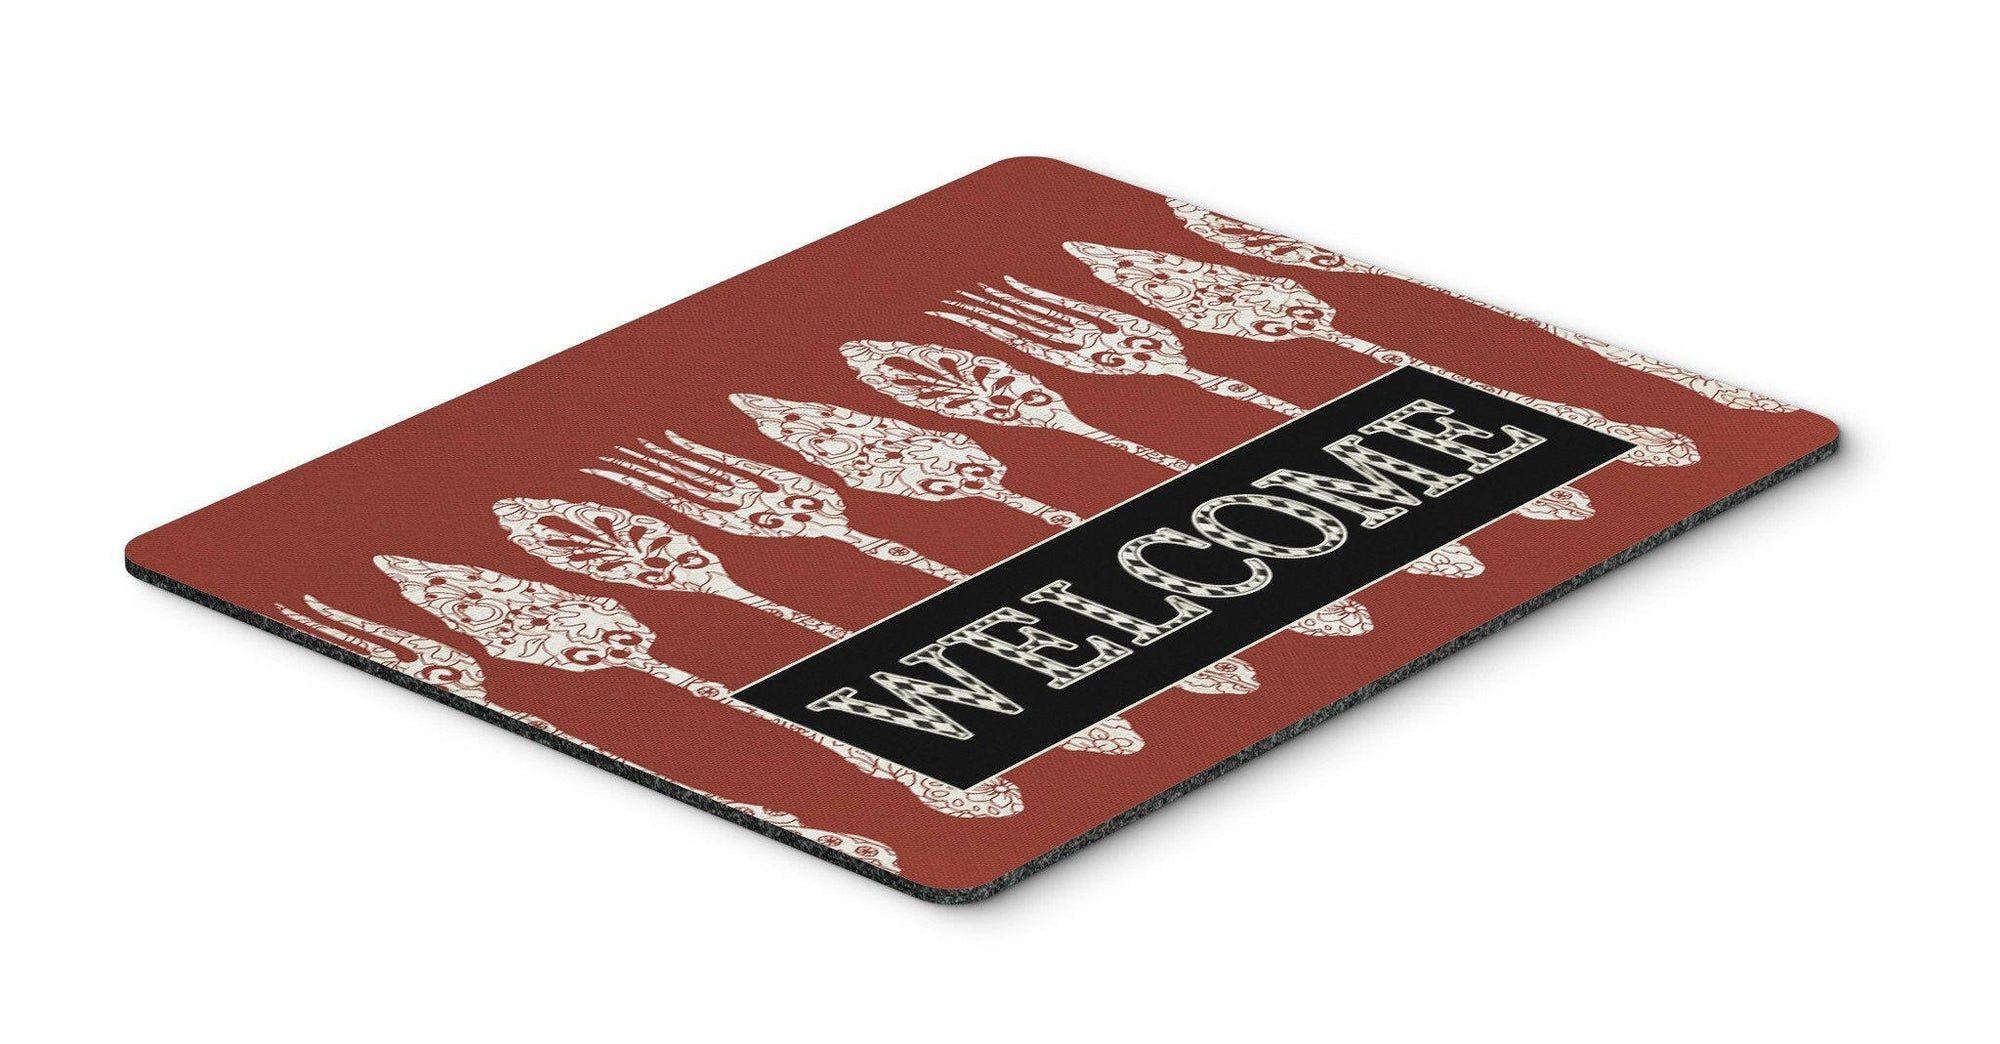 Serving Spoons Welcome Mouse Pad, Hot Pad or Trivet SB3090MP by Caroline's Treasures